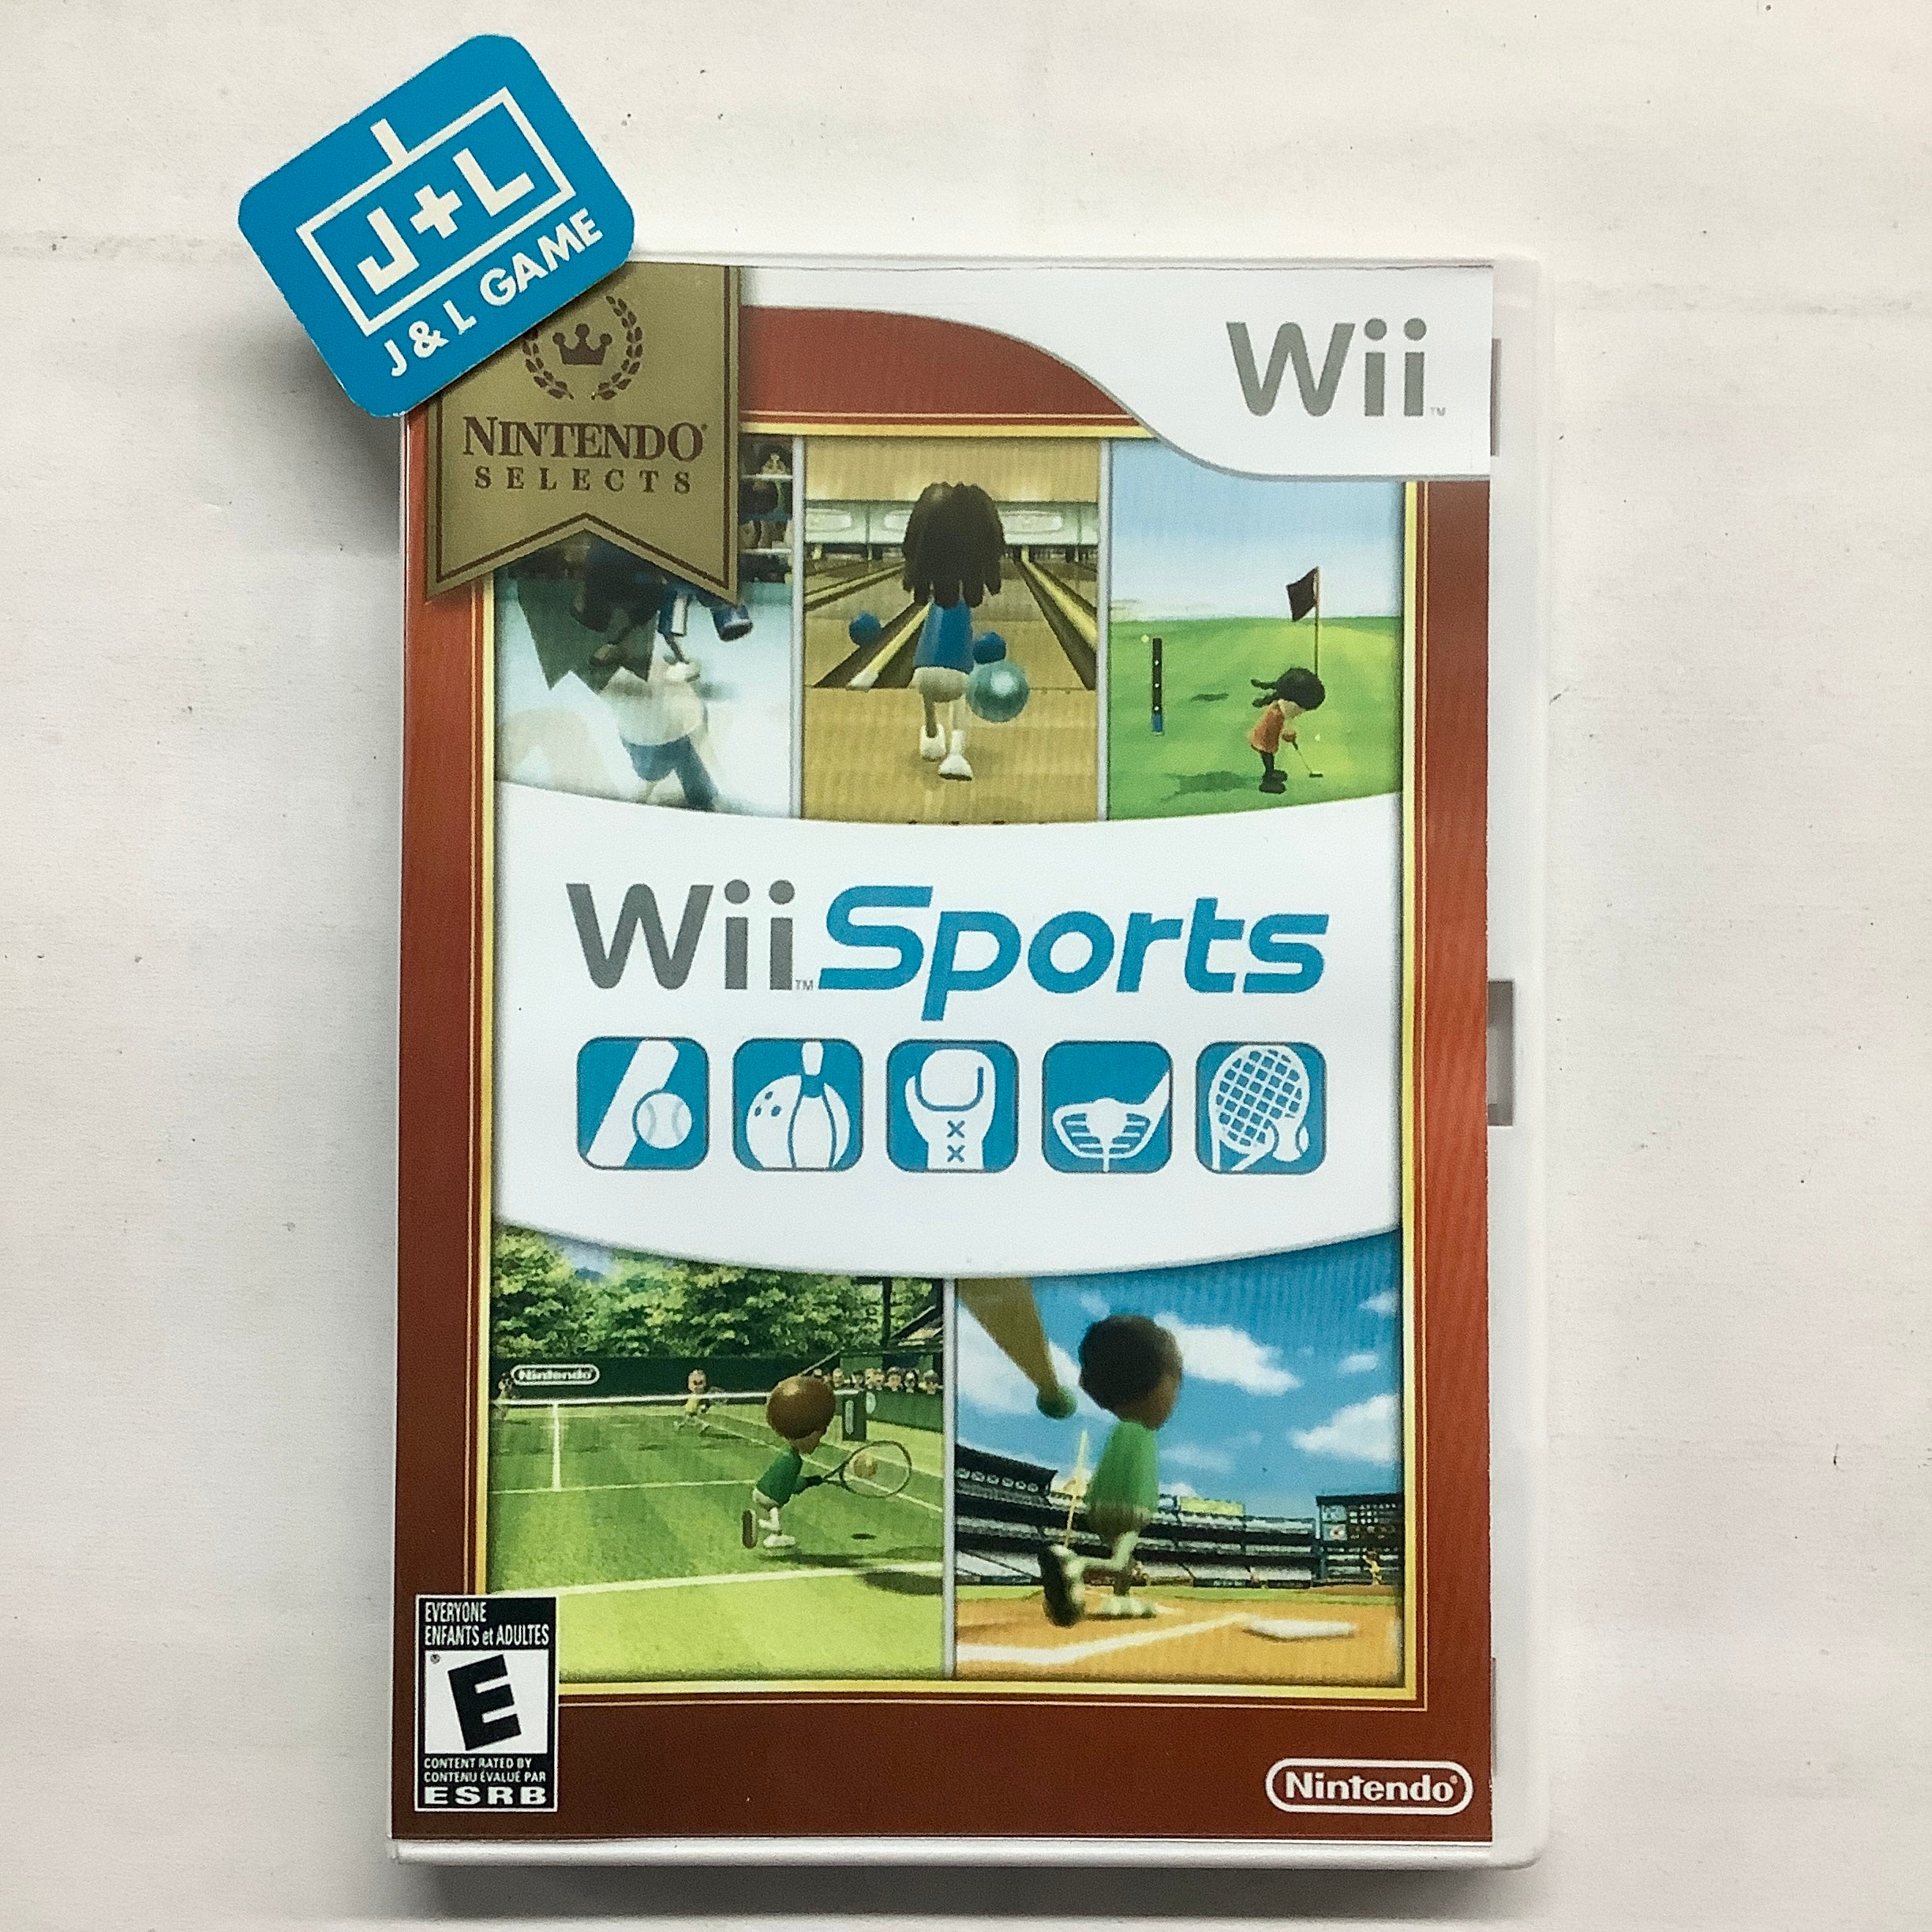 Wii Sports - Nintendo Selects (Wii)